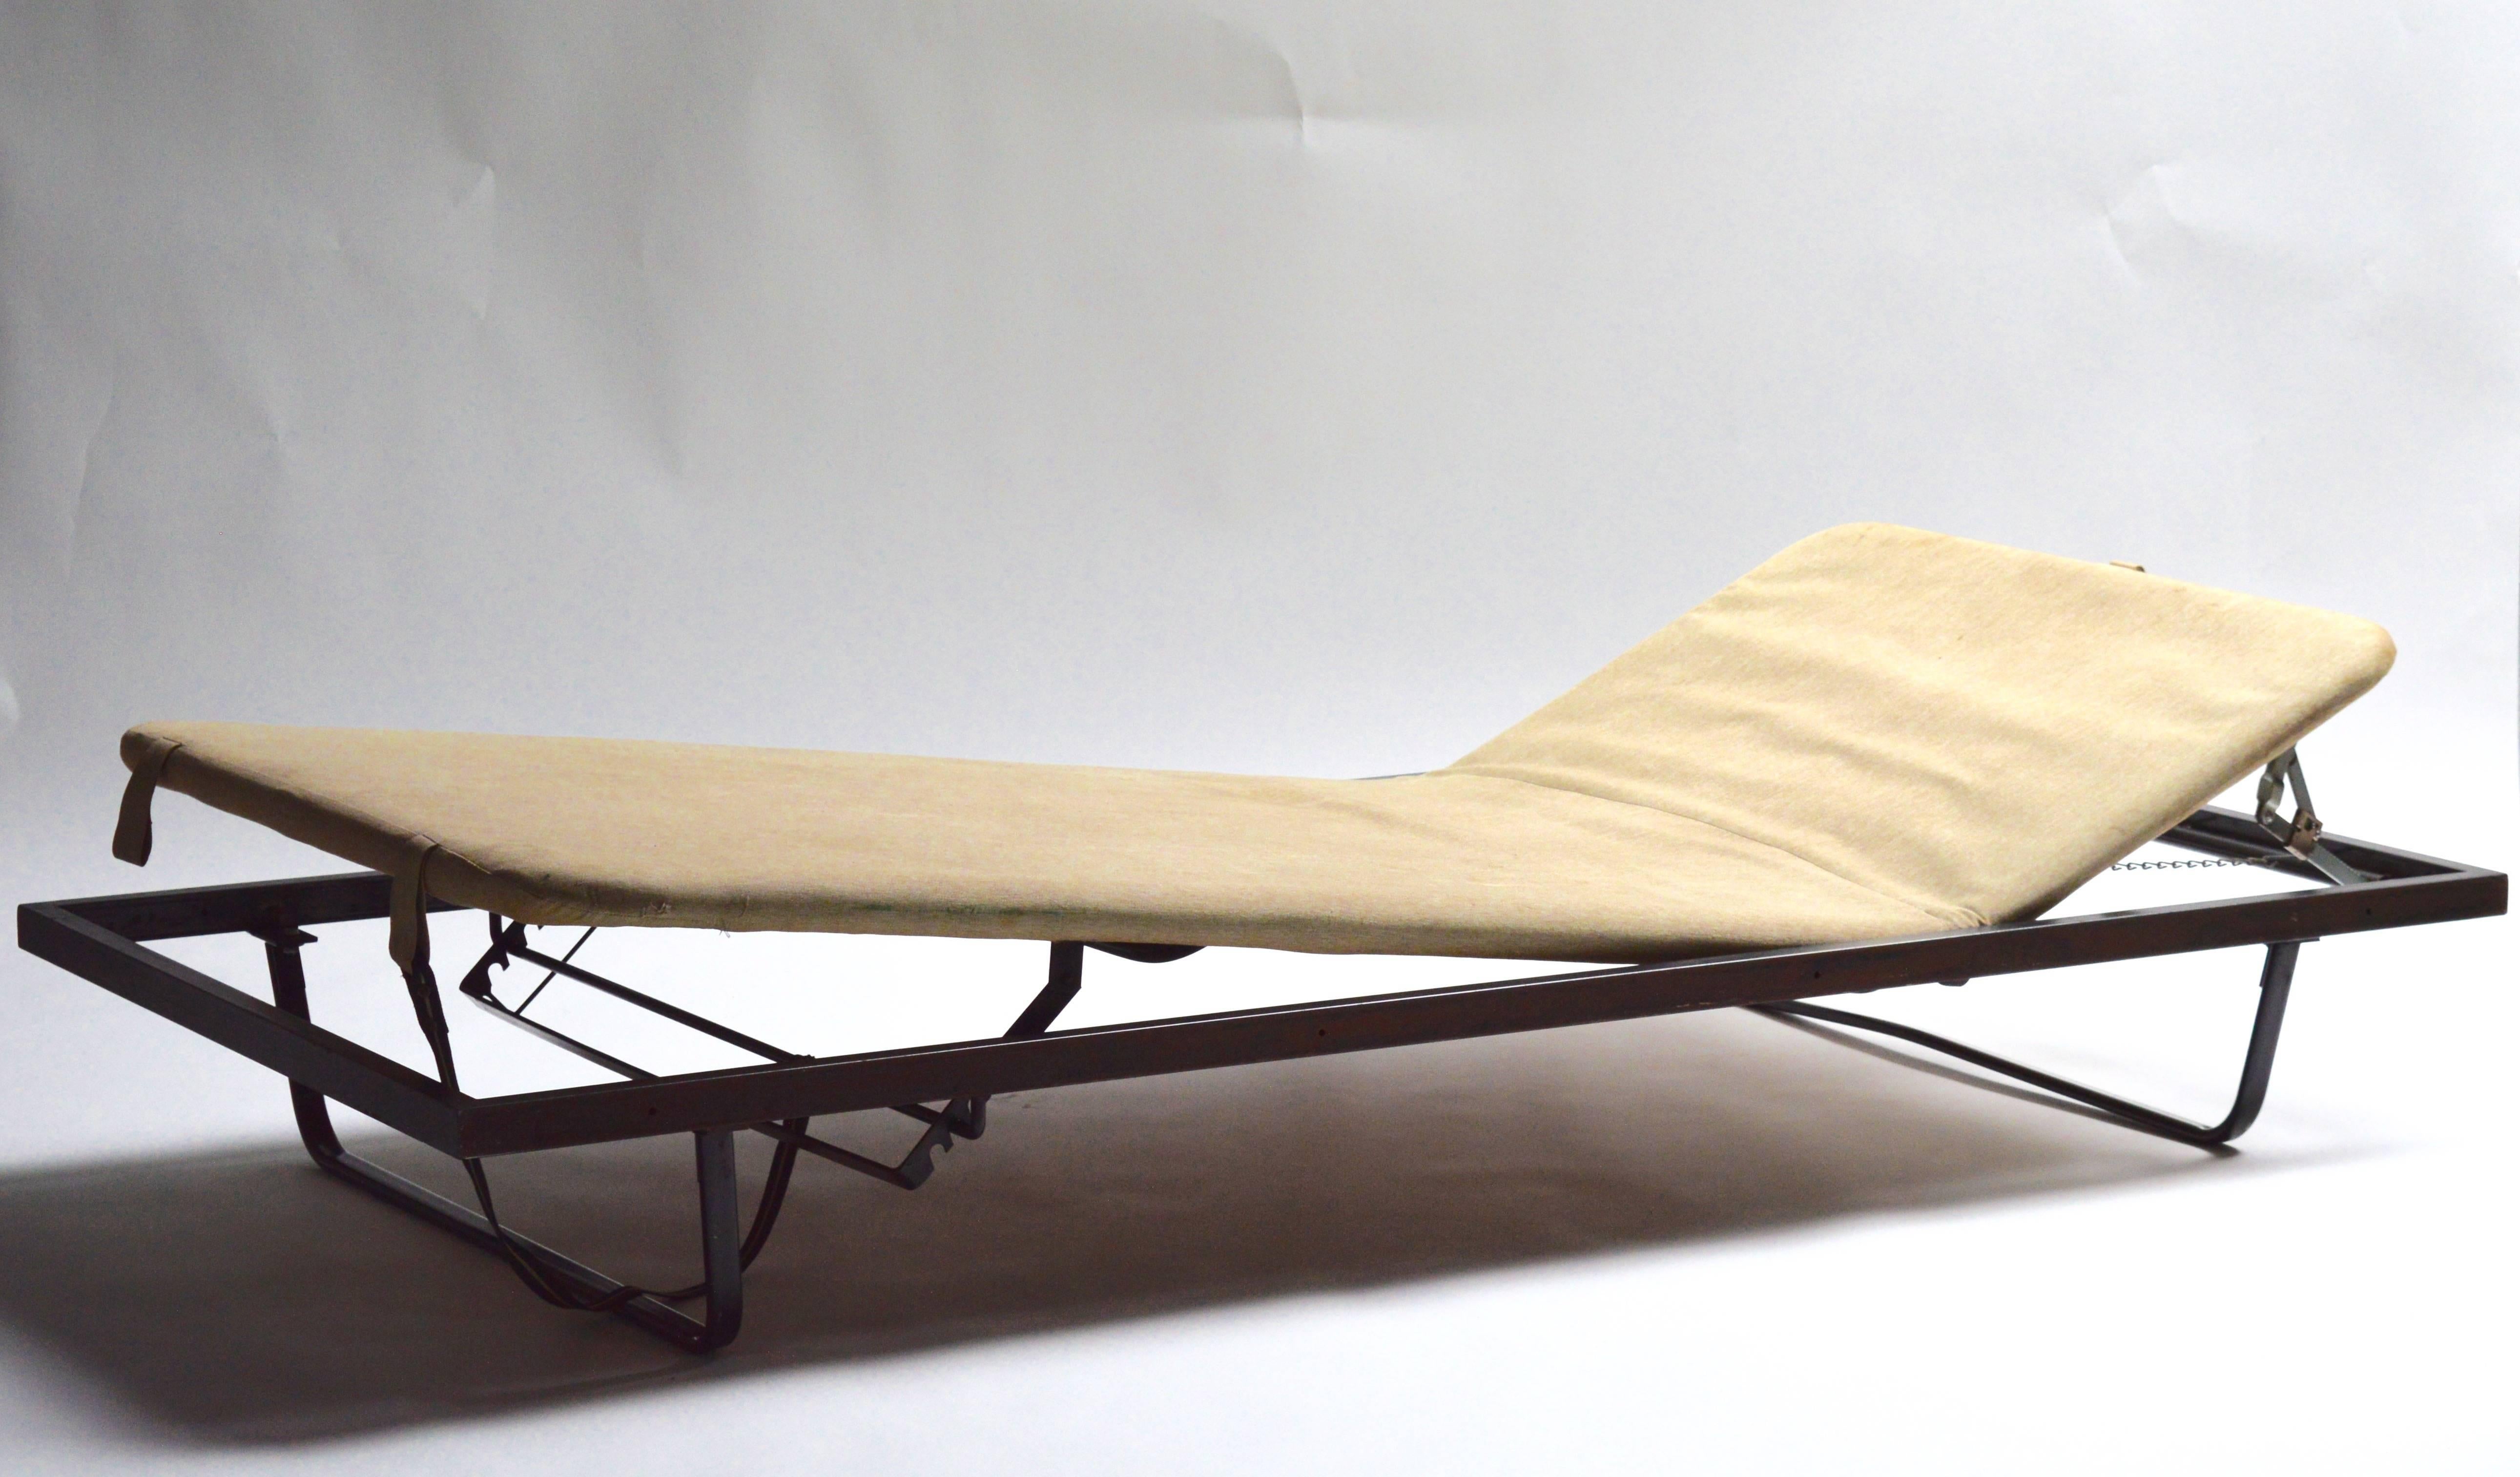 Sleek Industrial German military daybed. Both ends are adjustable up and down. Newly upholstered. Modern design and great lines. Iron frame with spring backed cushion. Excellent vintage condition.